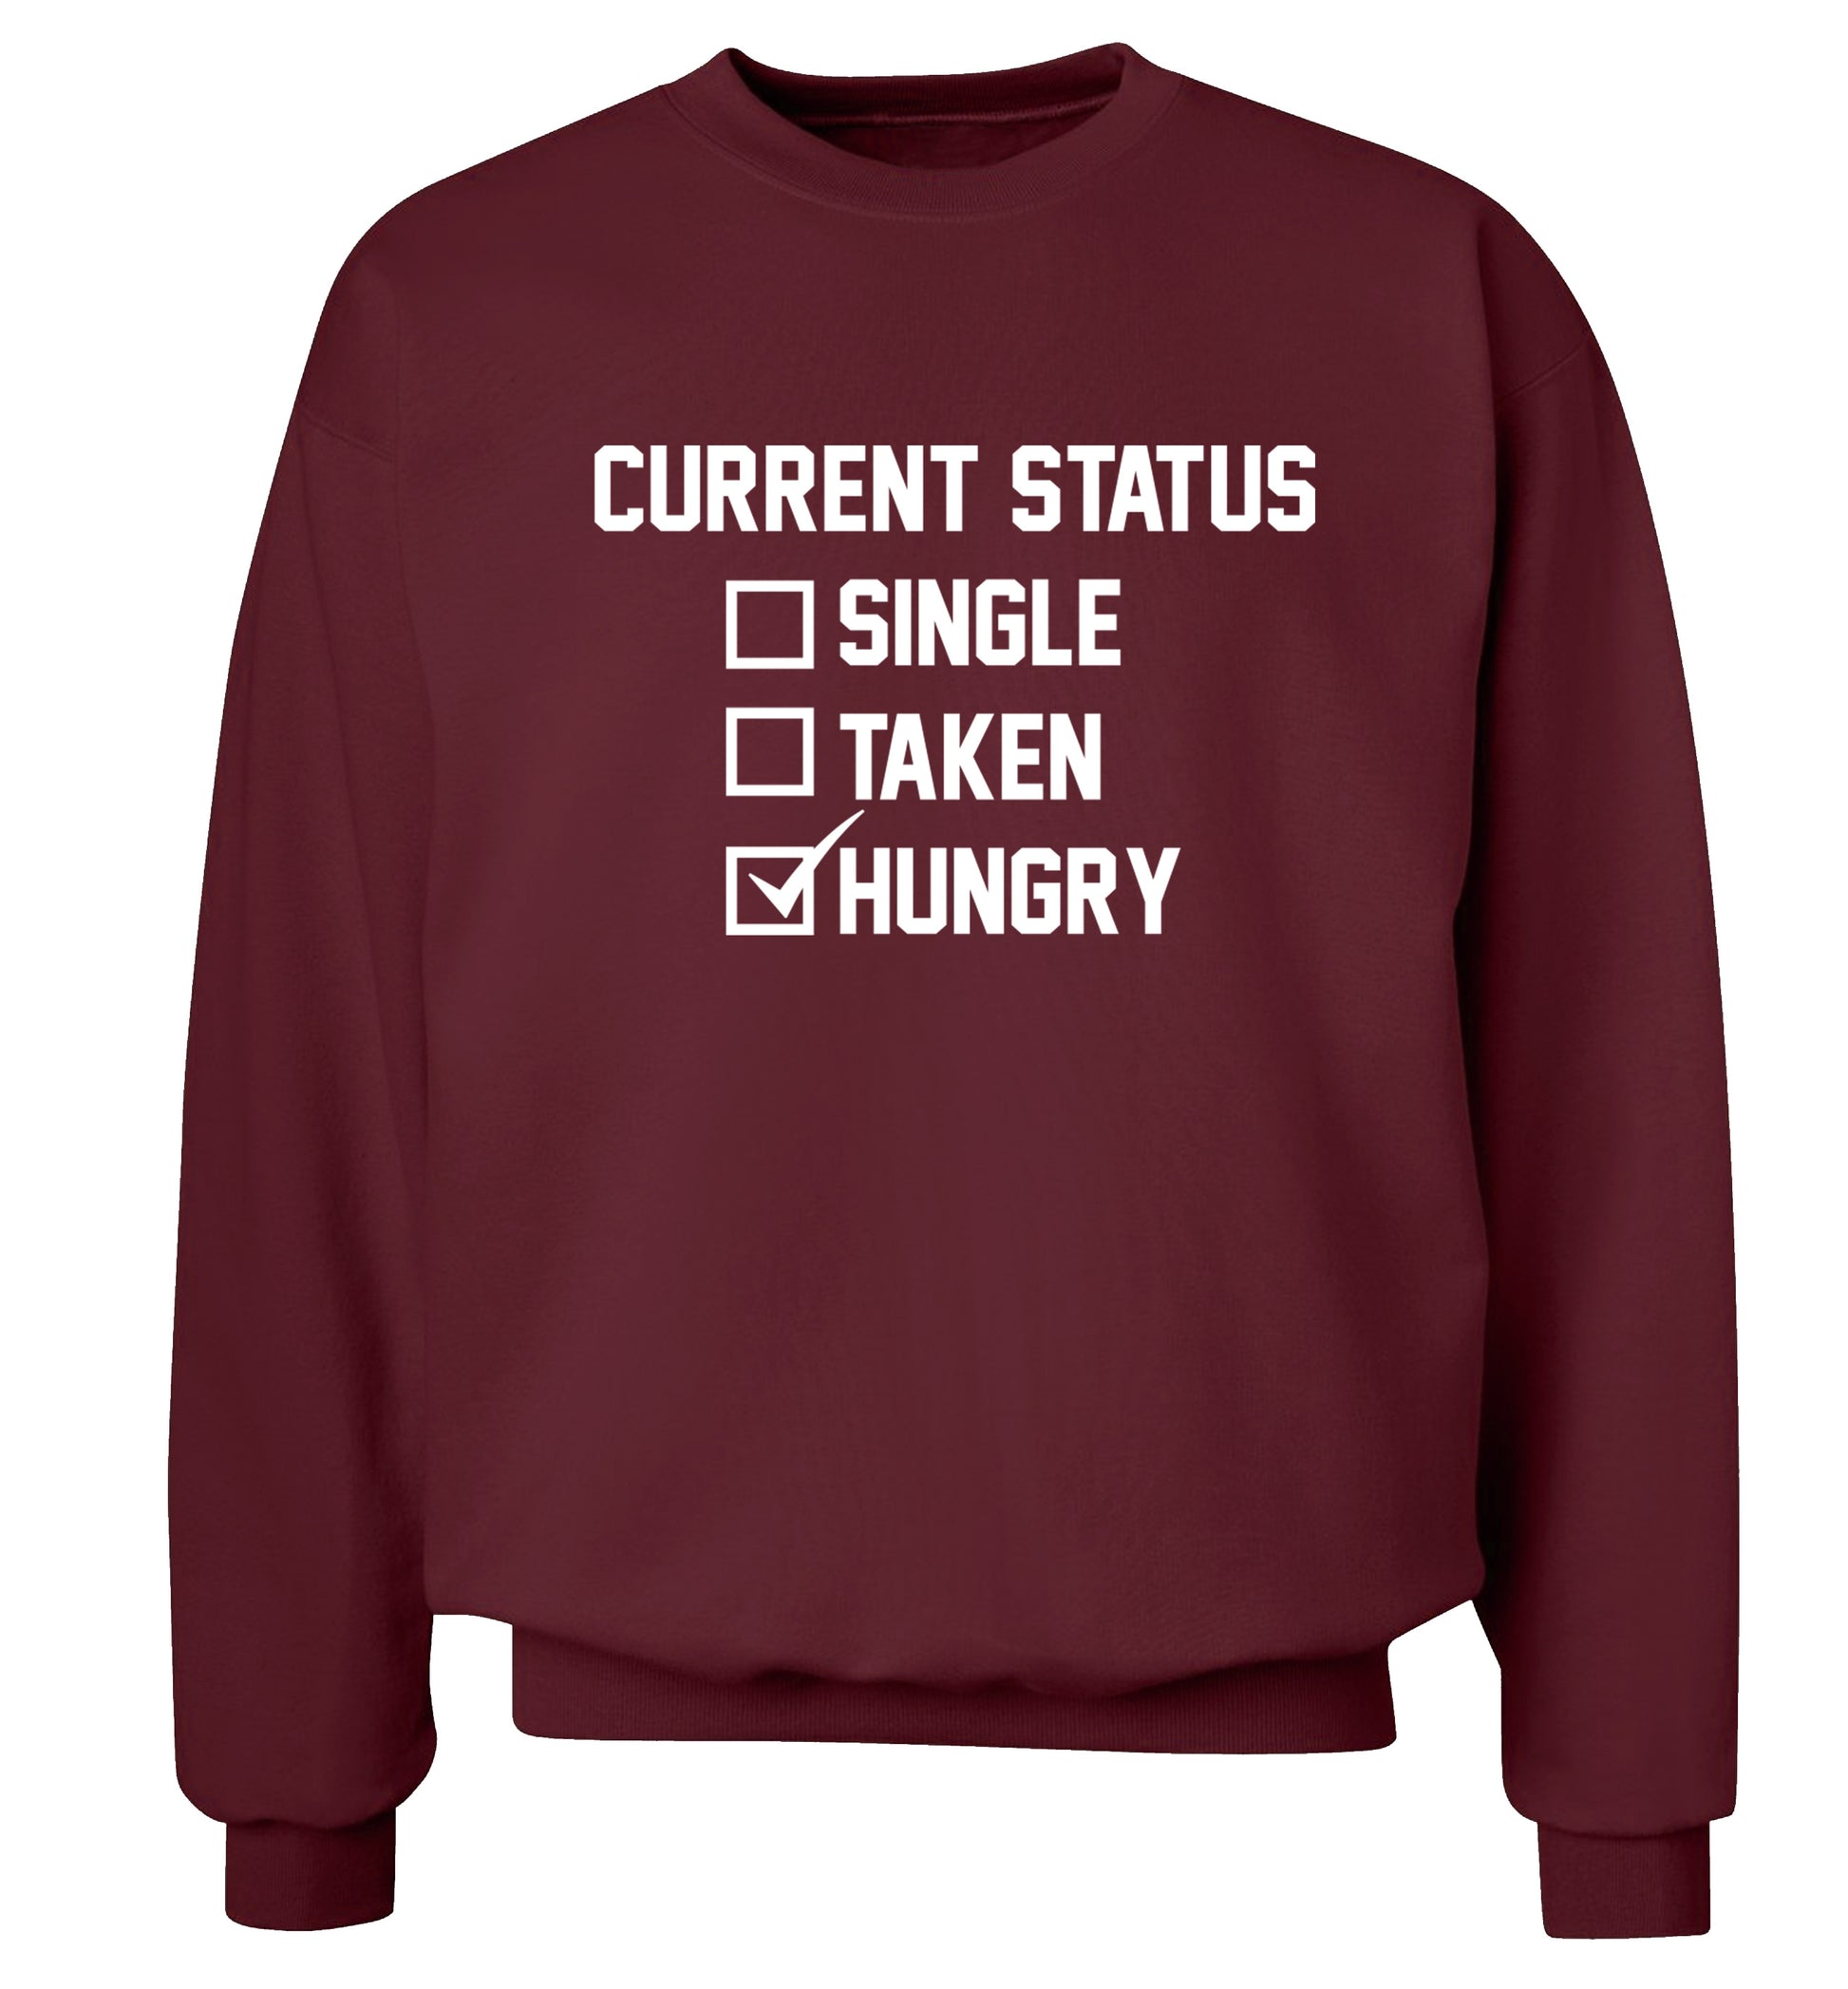 Relationship status single taken hungry Adult's unisex maroon Sweater 2XL